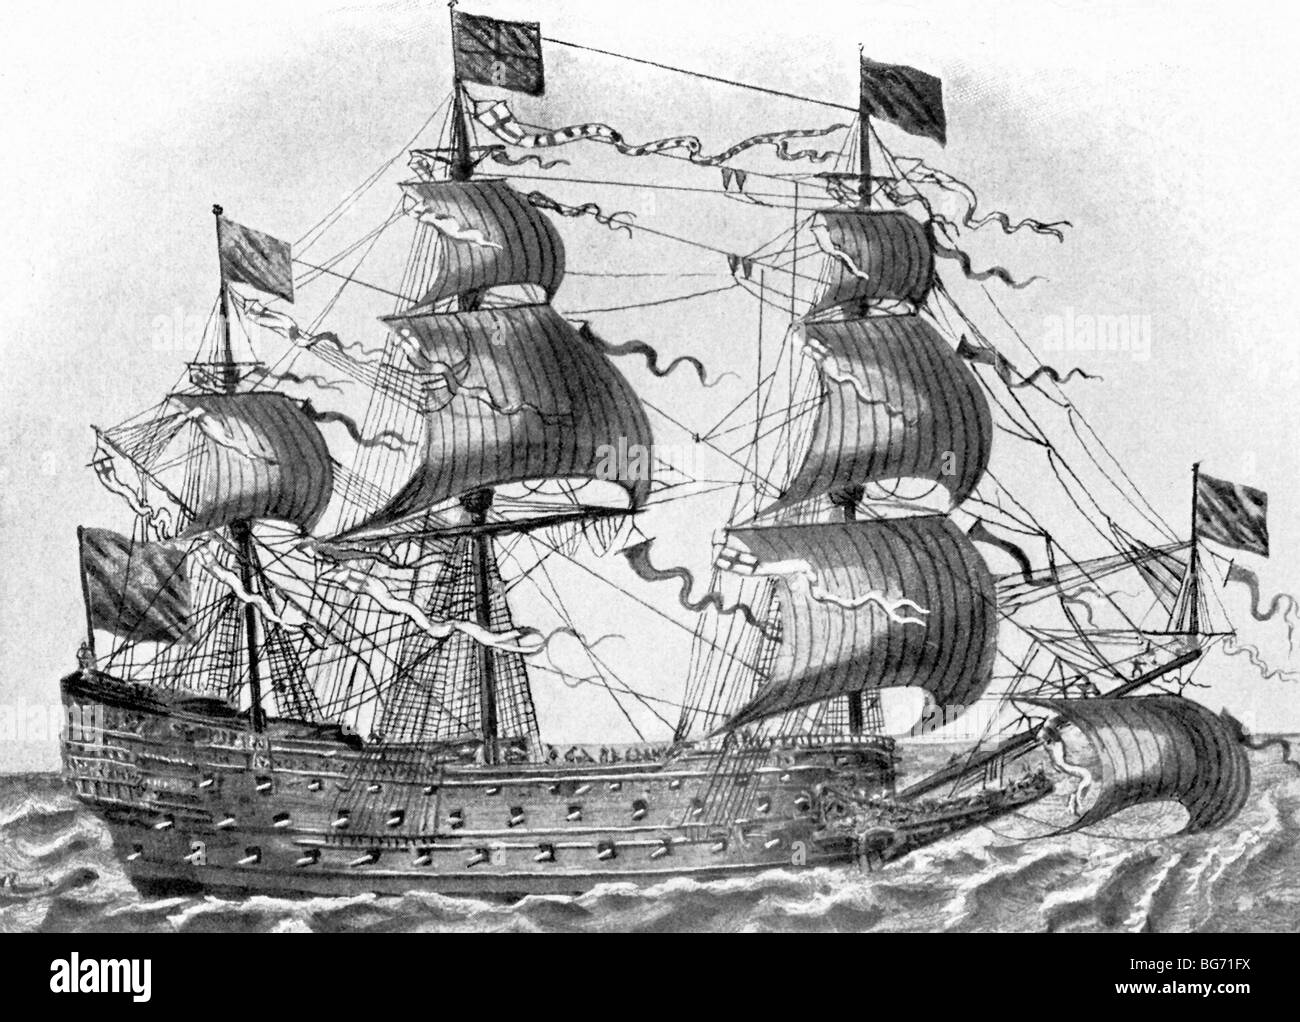 This English warship belonged to the class known as ship-of-the-line, a fighting tactic used at the time (1600s-mid1800s). Stock Photo